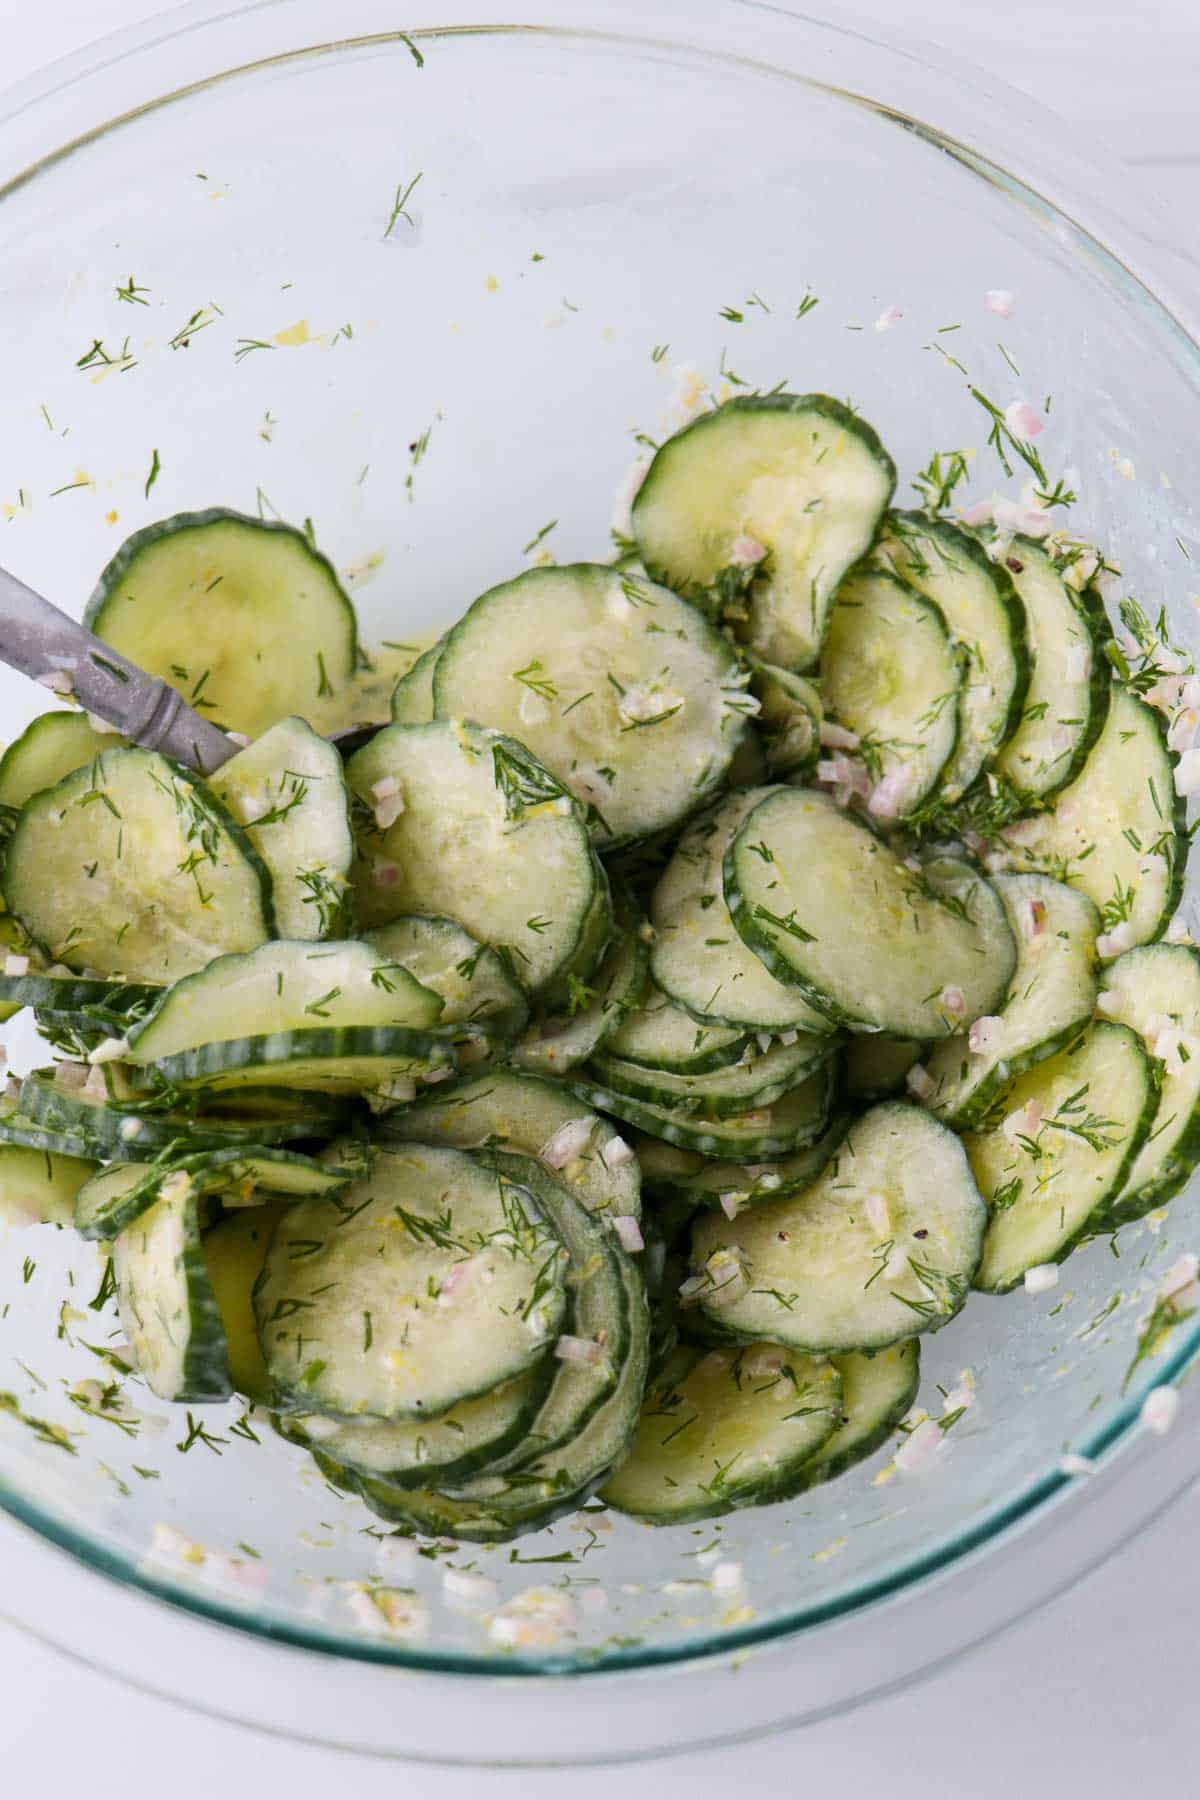 Lemon Cucumber Salad with Dill in a glass bowl with a spoon.